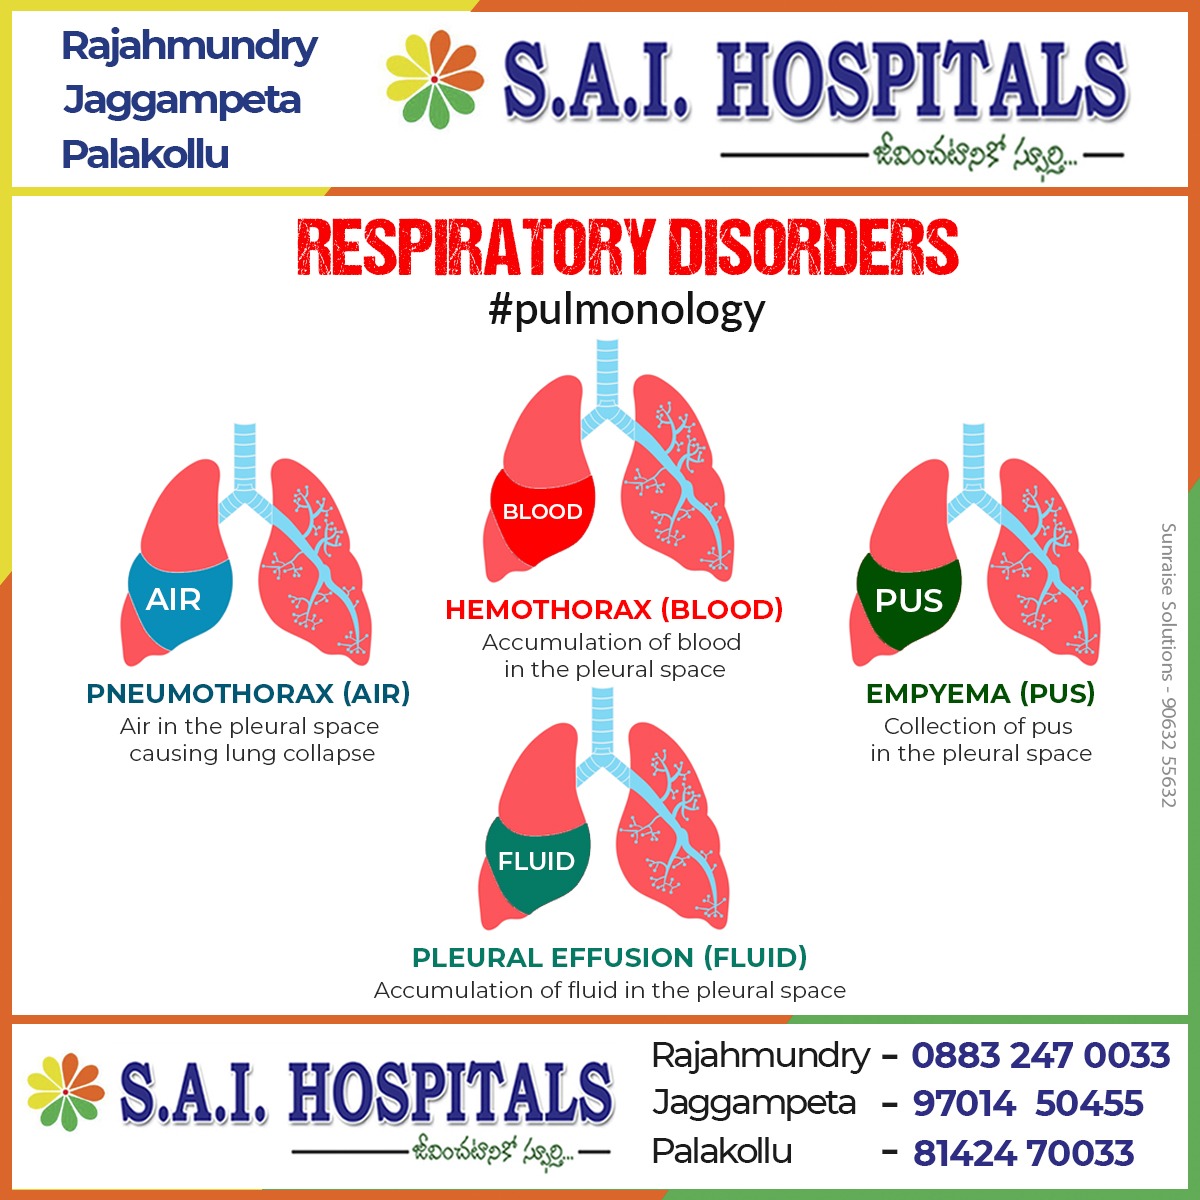 THESE RESPIRATORY DISORDERS MAY OCCUR BE CAUTIOUS
#saihospitals #lungcare #experts #doctors #pulmonology #visitustoday #besafe